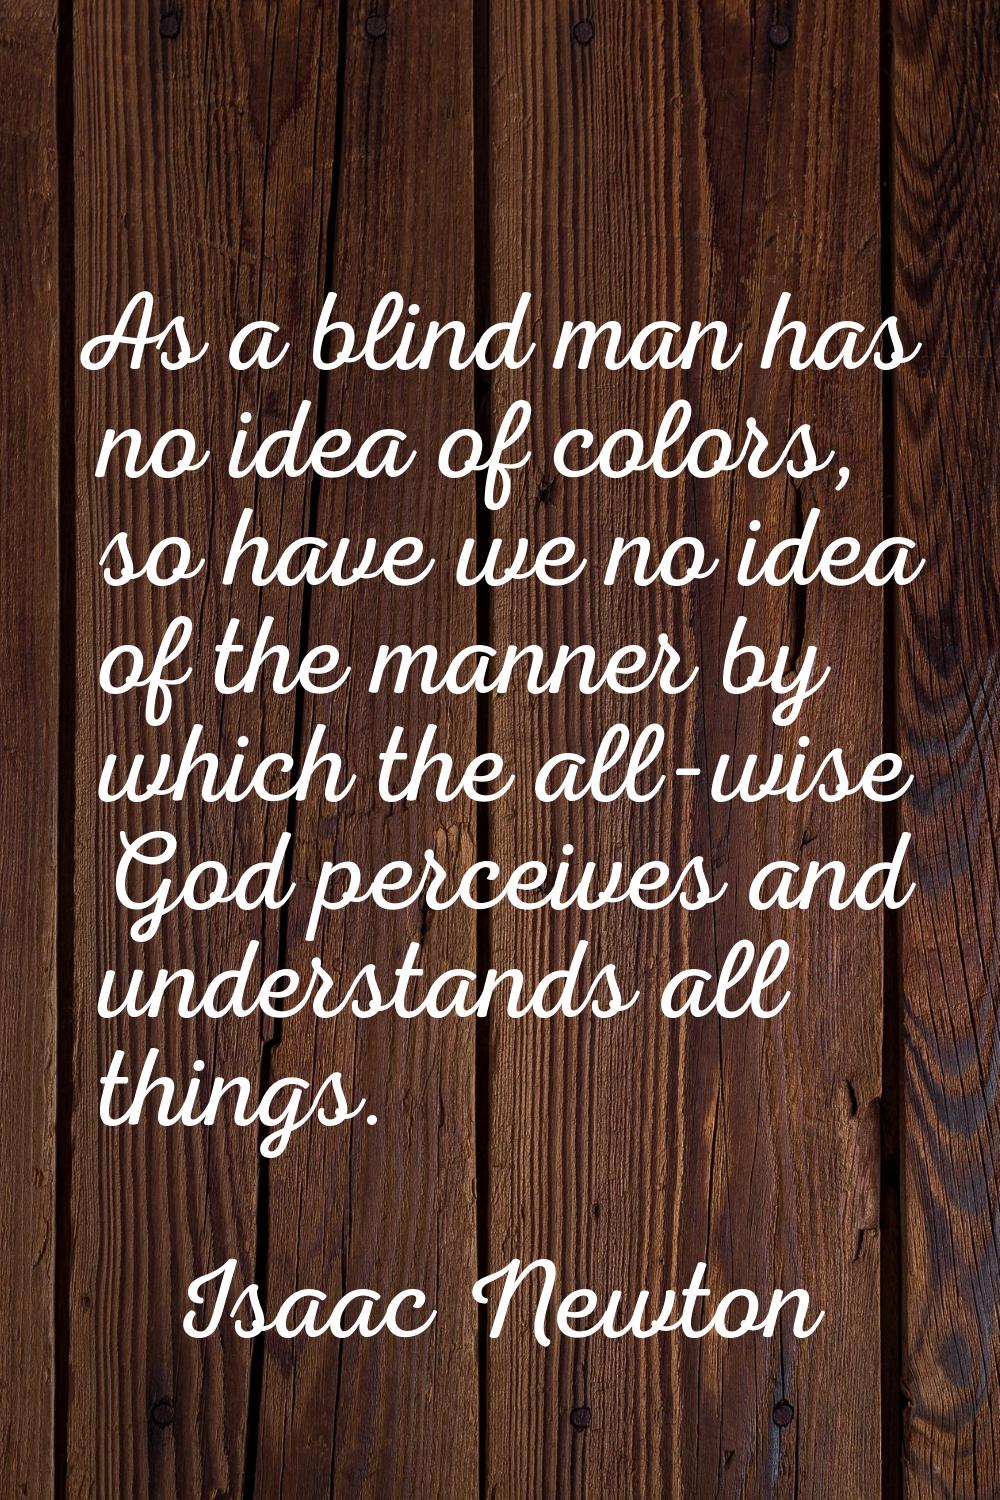 As a blind man has no idea of colors, so have we no idea of the manner by which the all-wise God pe